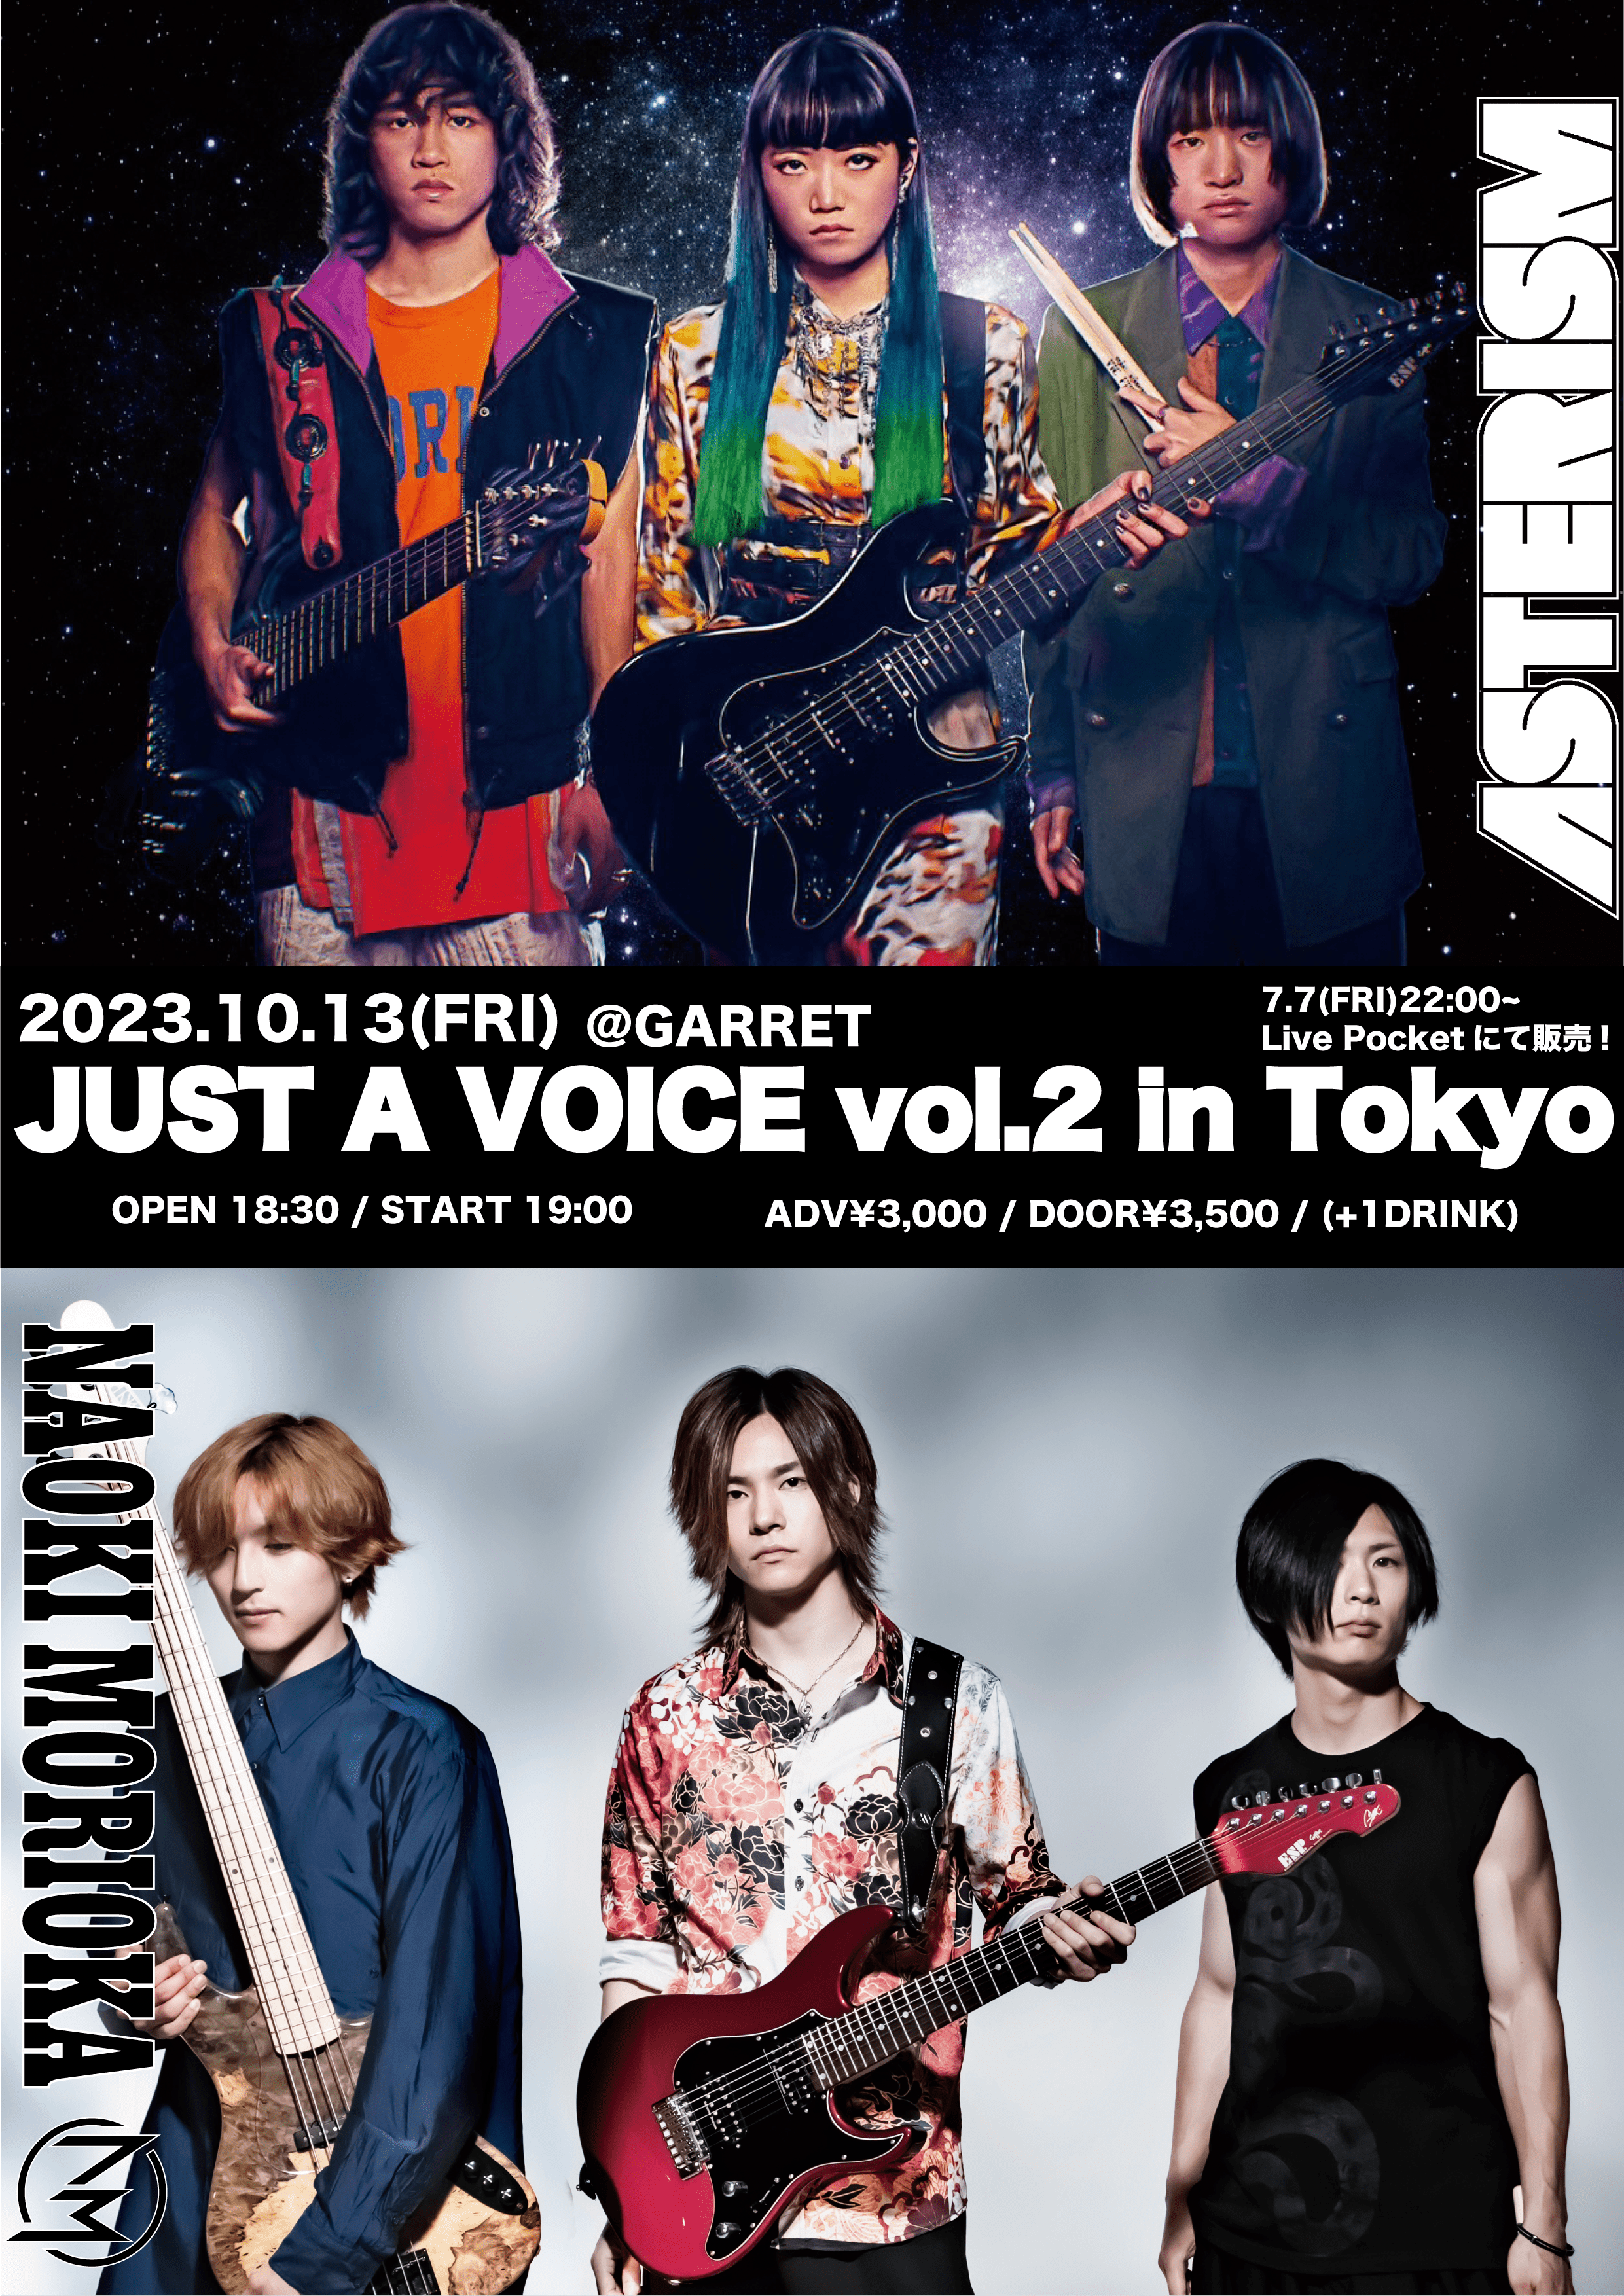 JUST A VOICE vol.2 in Tokyo